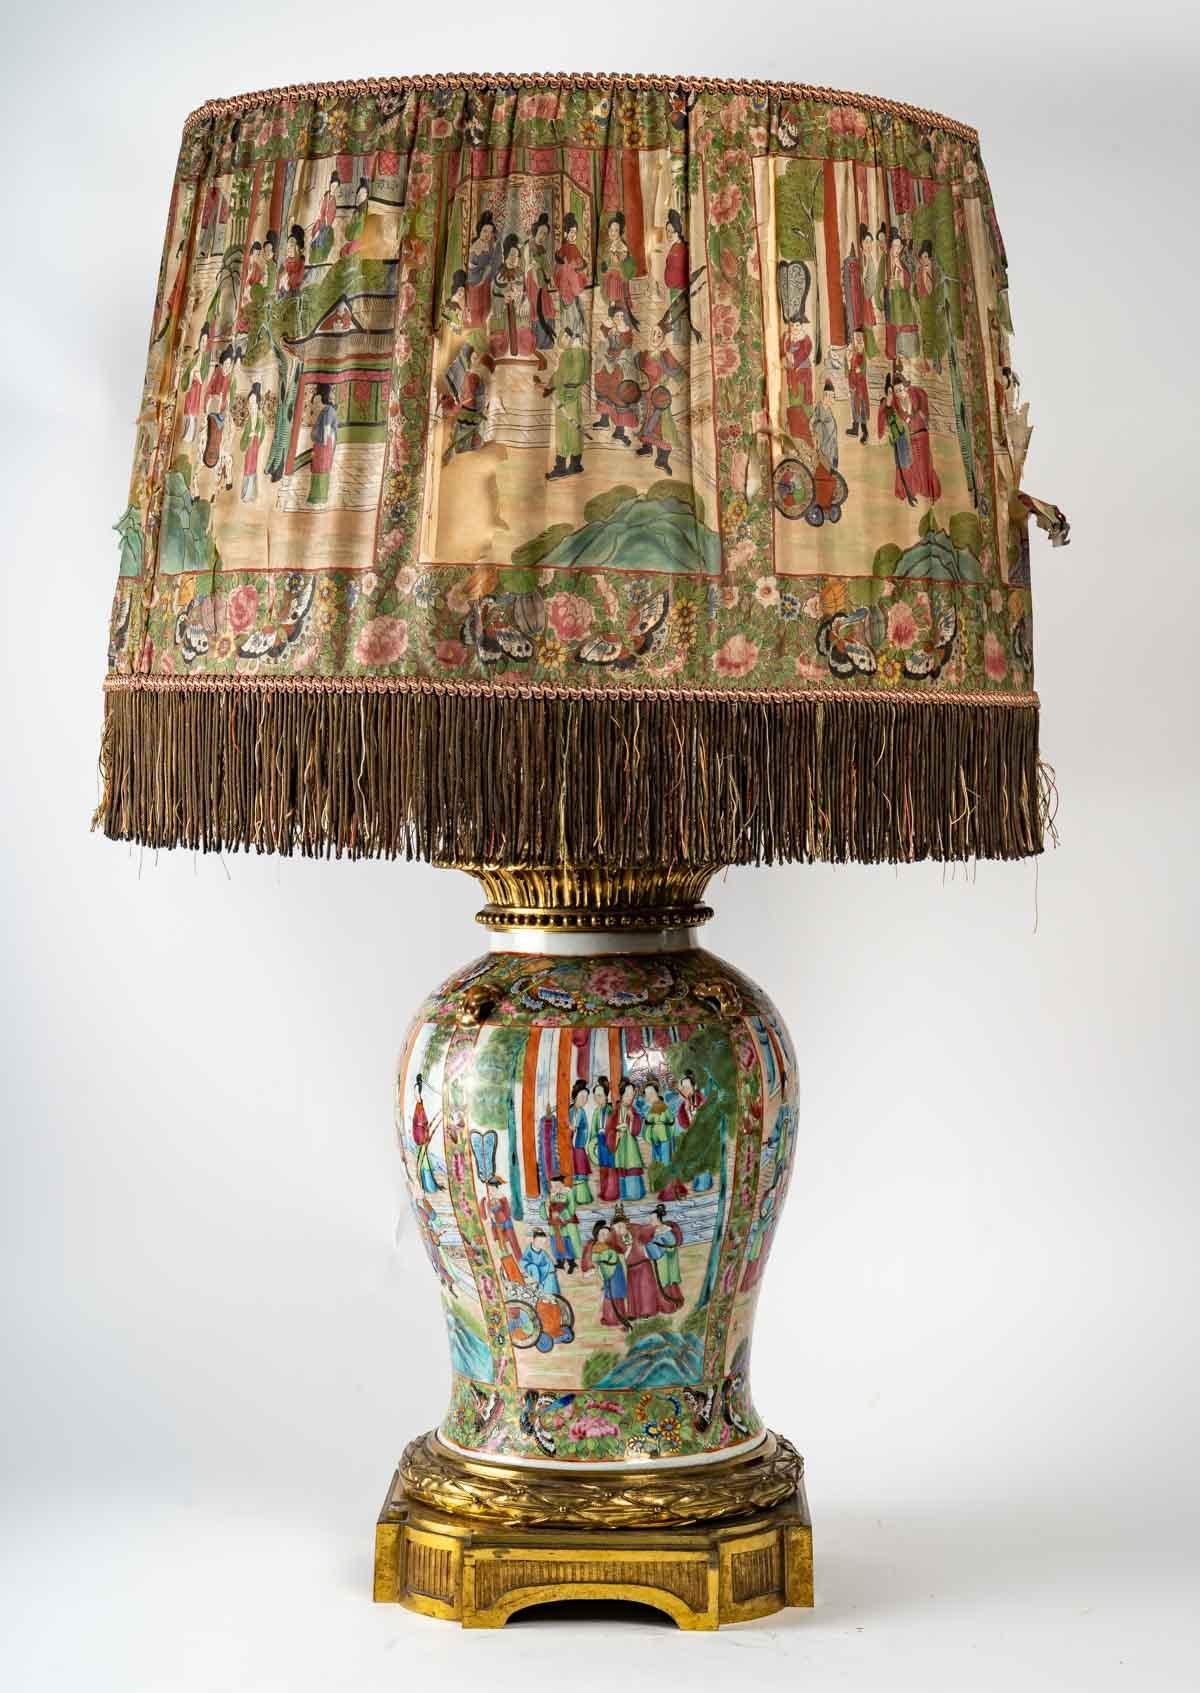 Very Important Satsuma Porcelain lamp, mounted in Gilt Bronze and silk shade (very damaged, but historical), 19th century, Napoleon III period, Great decoration.
Measures: H: 95 cm, D: 55 cm.